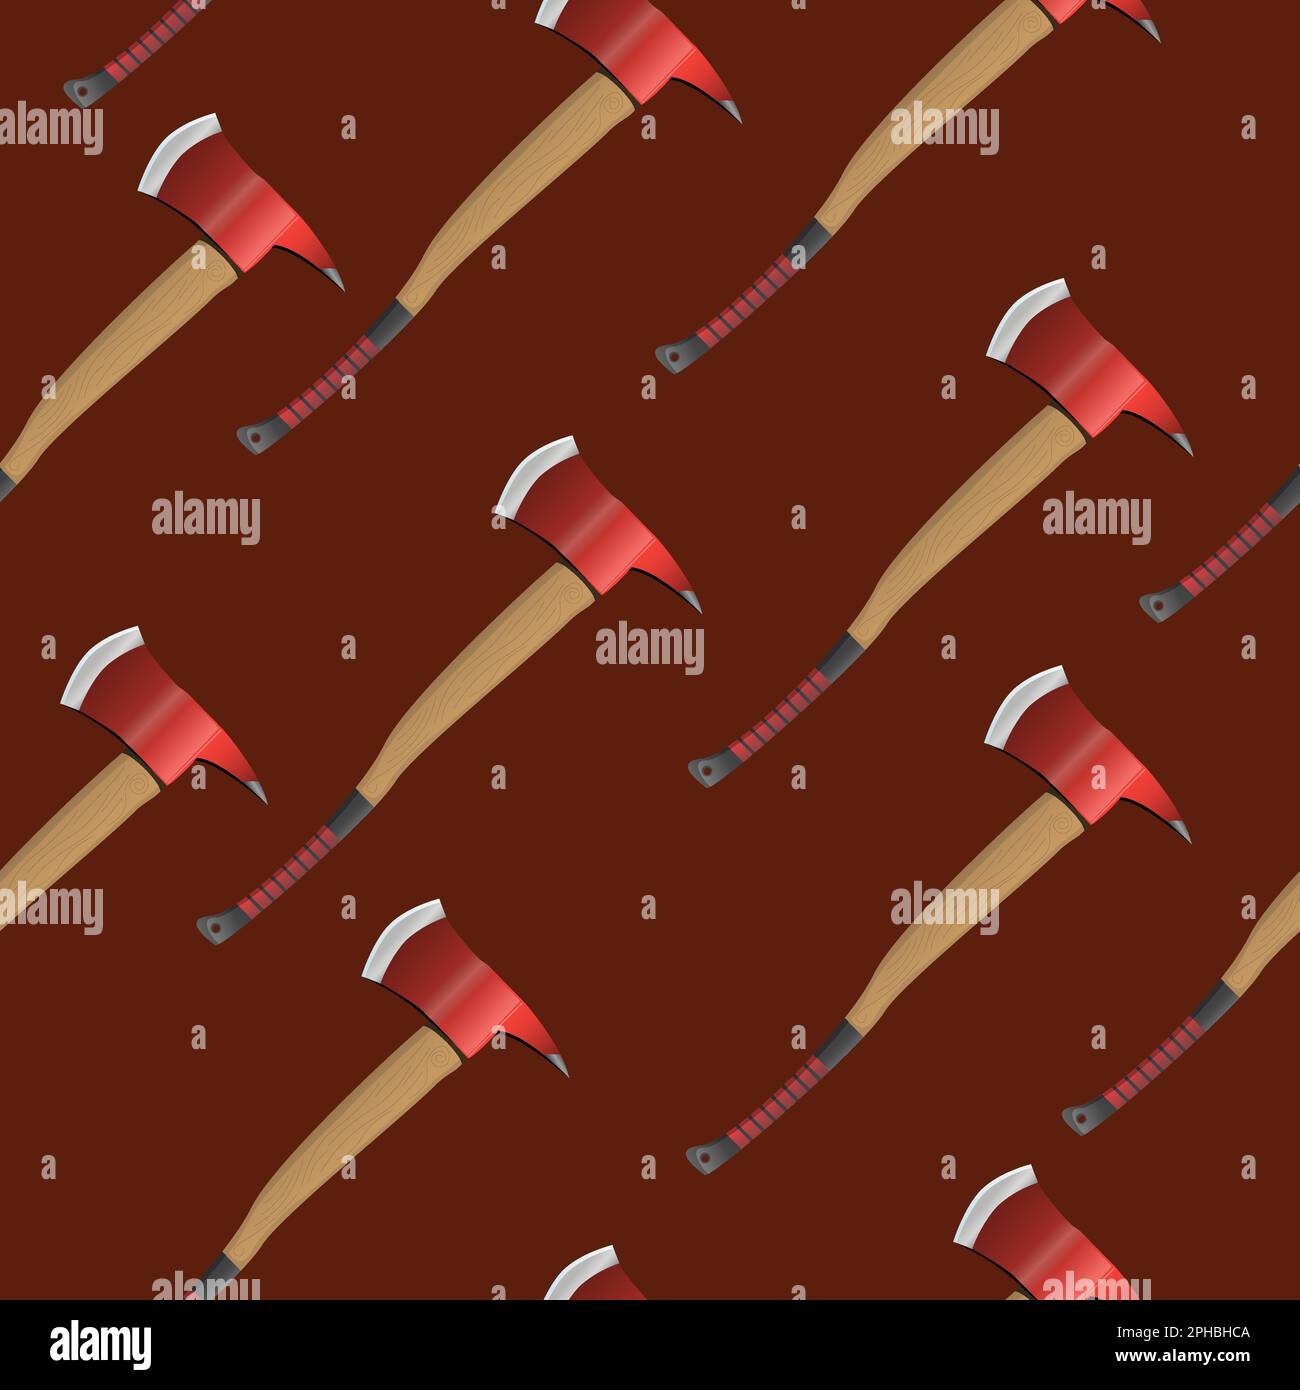 Seamless pattern with axe. Colorful vector illustration. Stock Vector